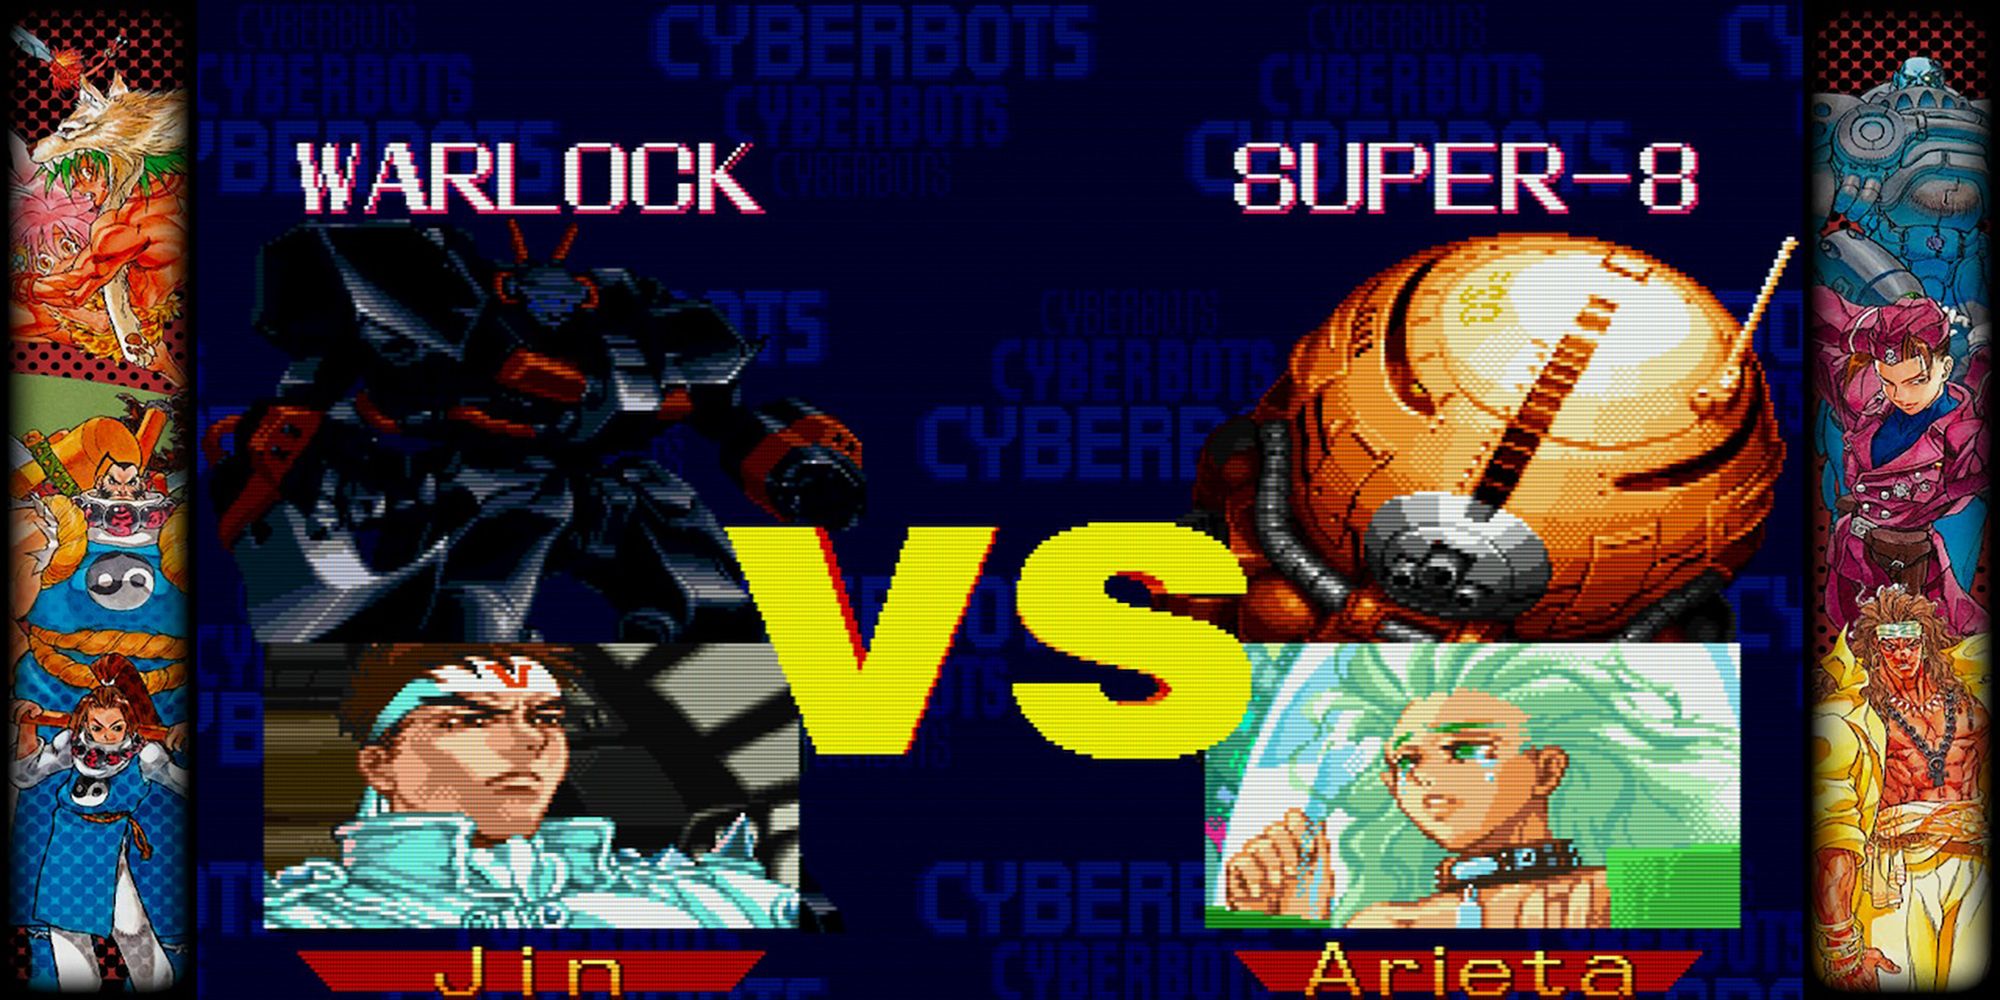 Jin, piloting Warlock, faces off against Arieta, piloting Super-8, in Cyberbots: Full Metal Madness. Capcom Fighting Collection.